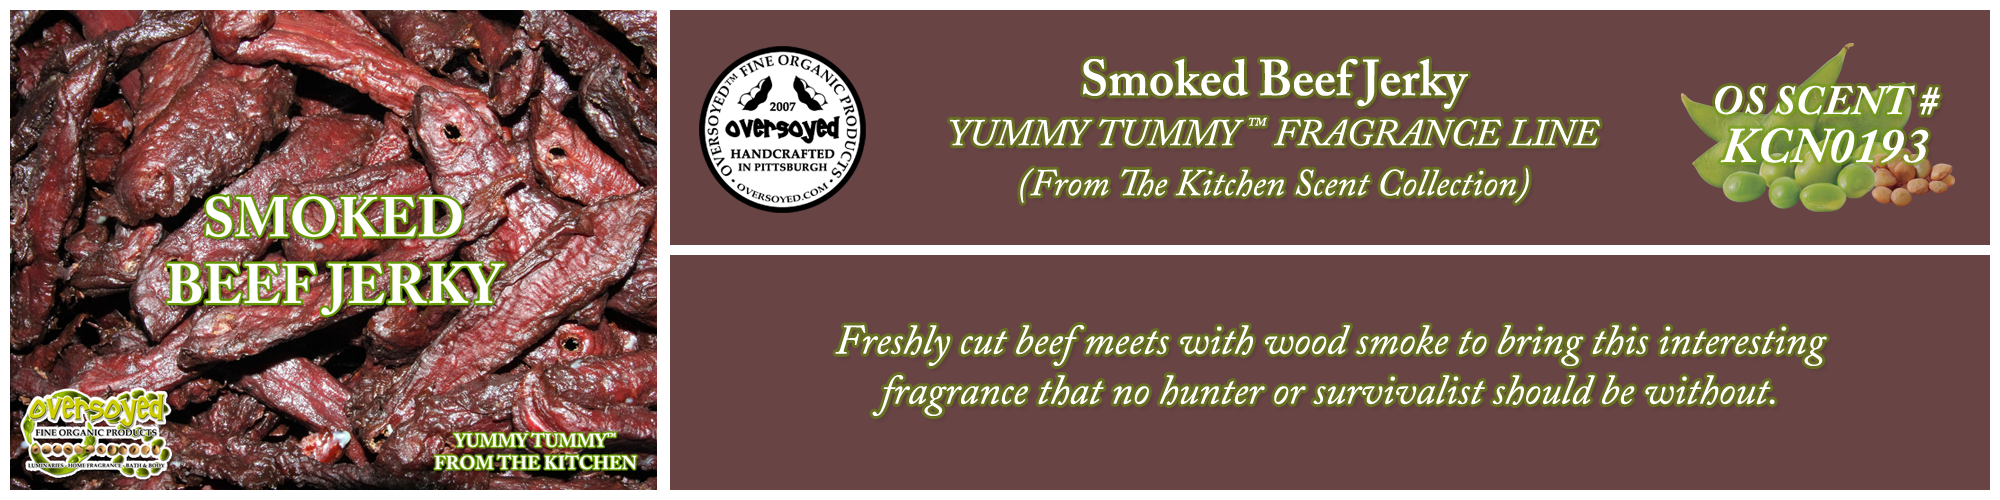 Smoked Beef Jerky Handcrafted Products Collection